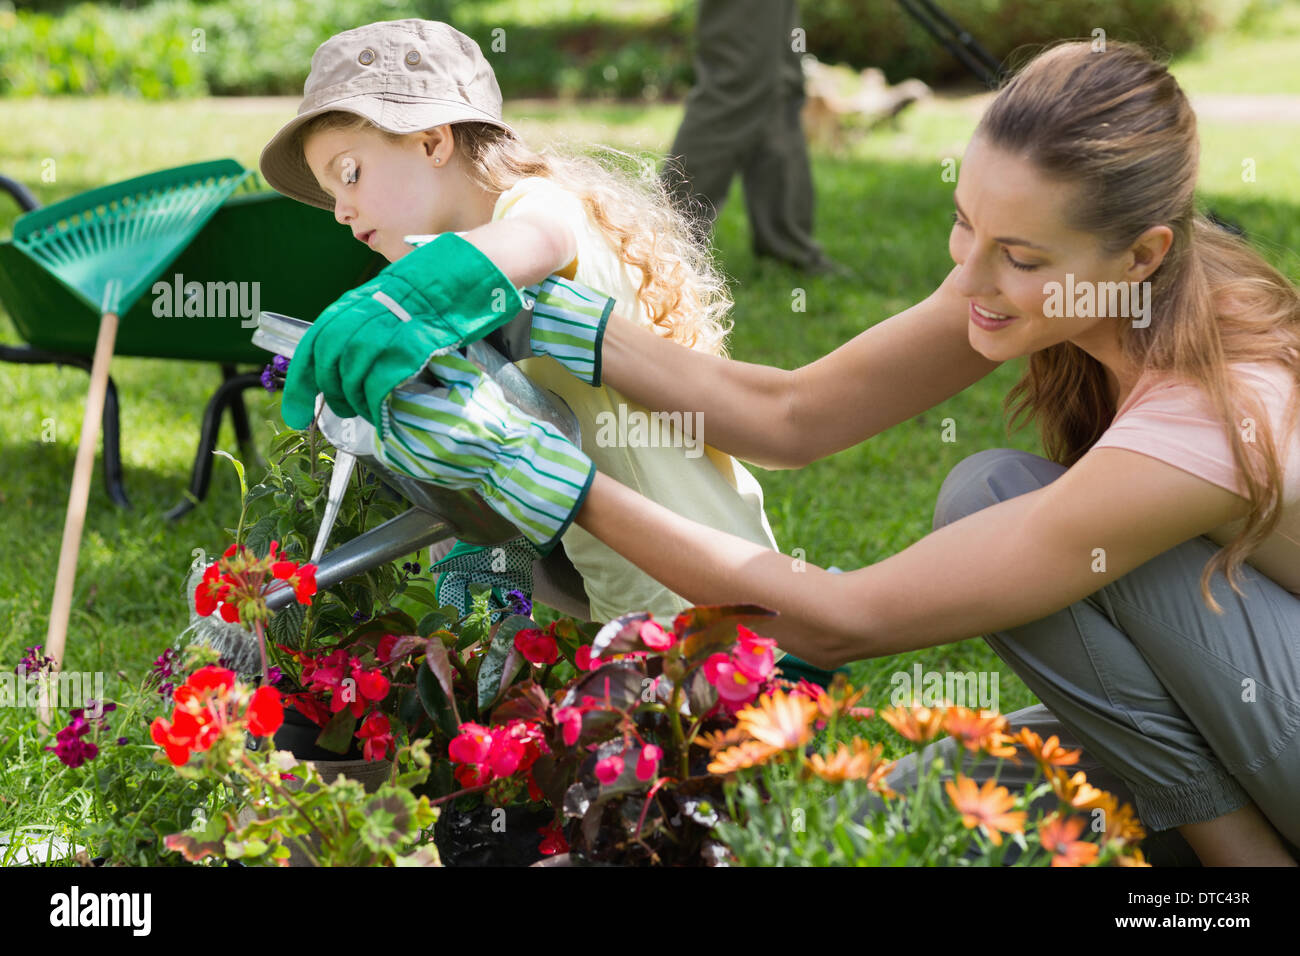 Mother and daughter watering plants at garden Stock Photo